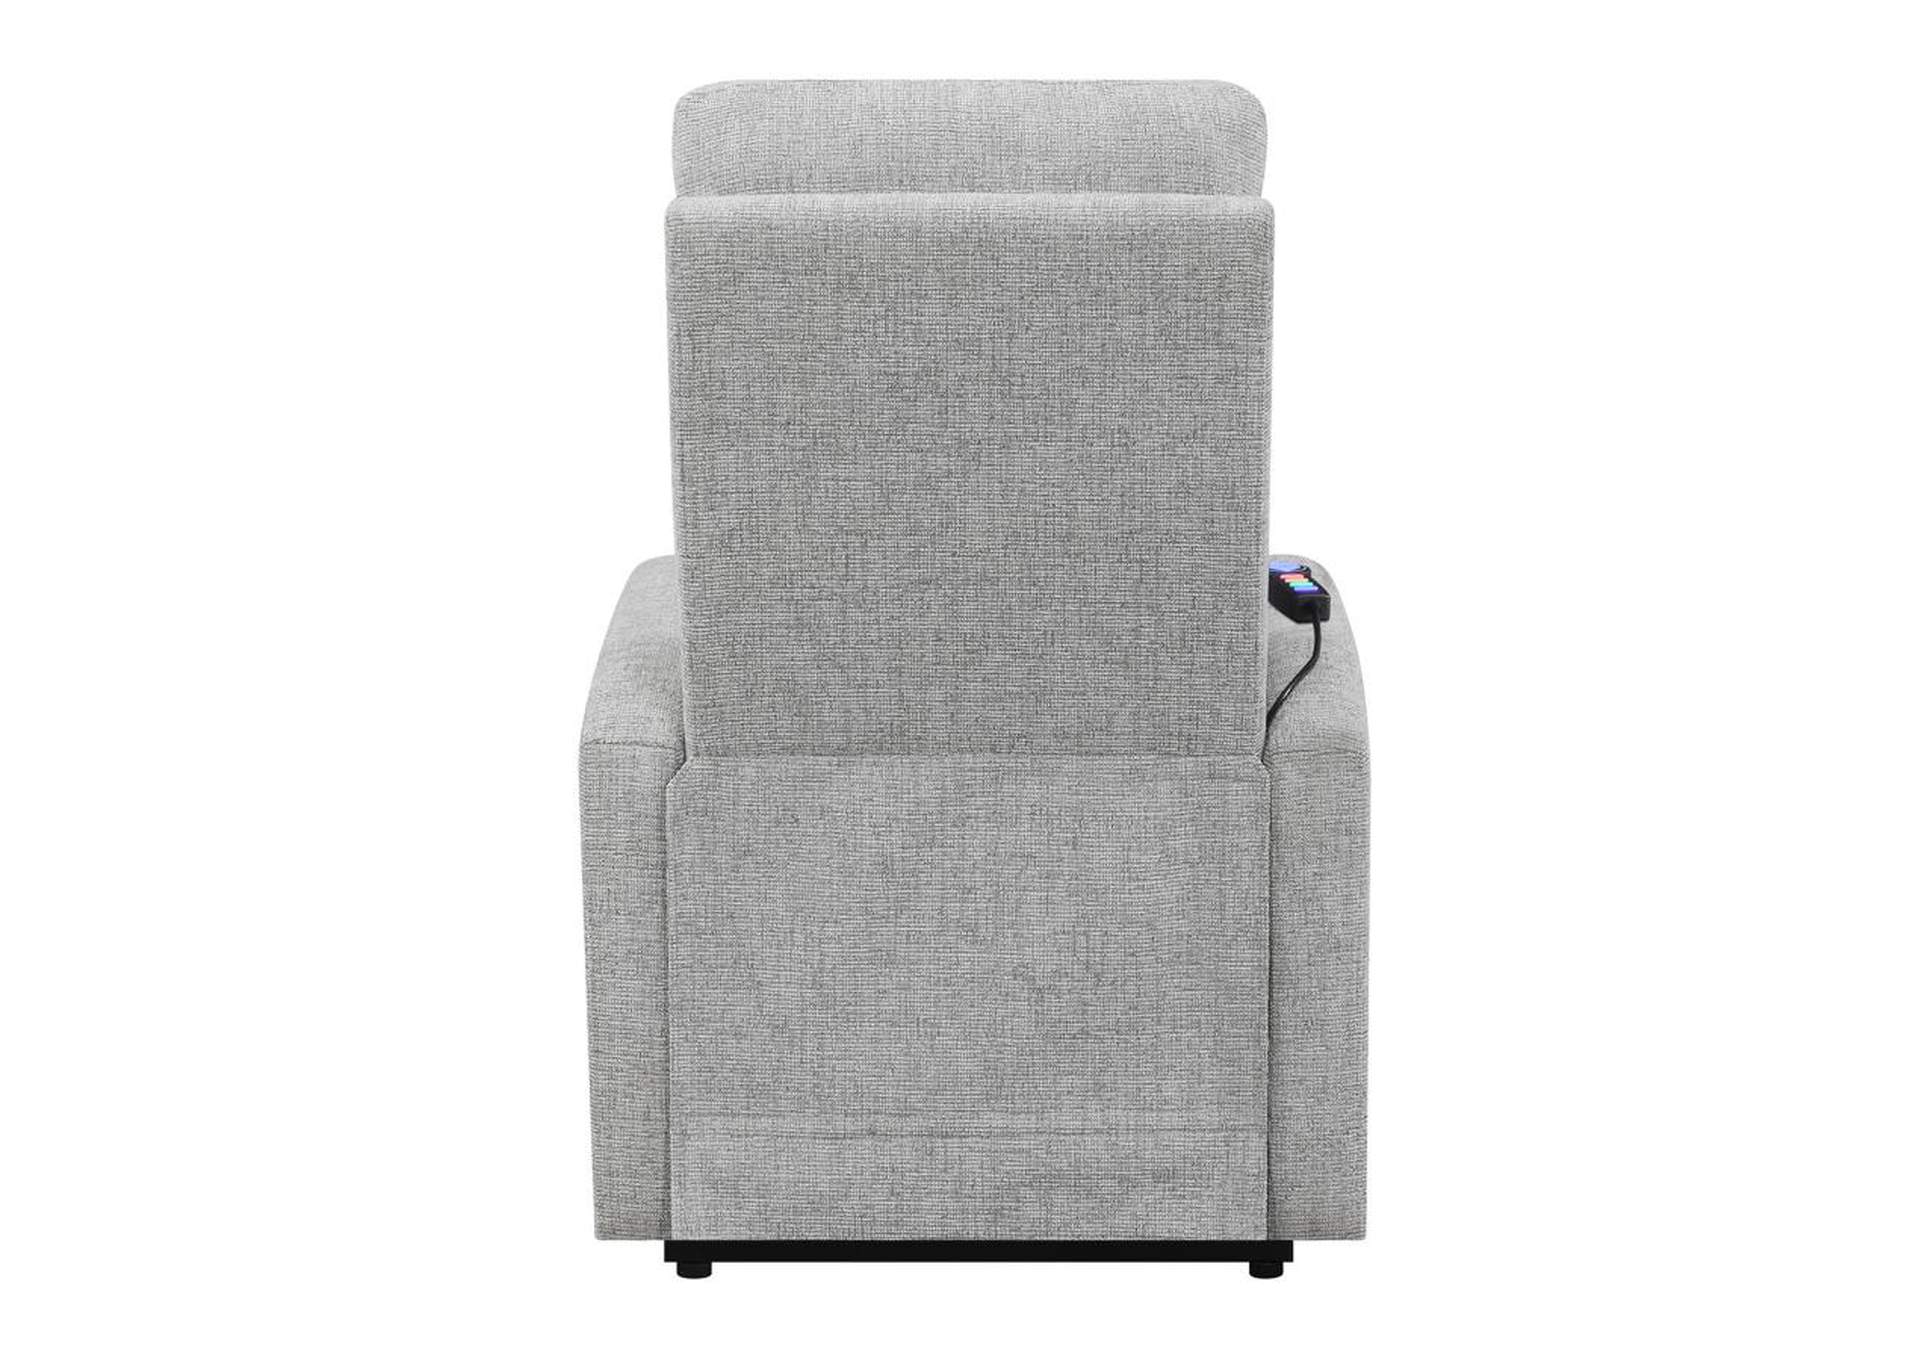 Howie Tufted Upholstered Power Lift Recliner Grey,Coaster Furniture